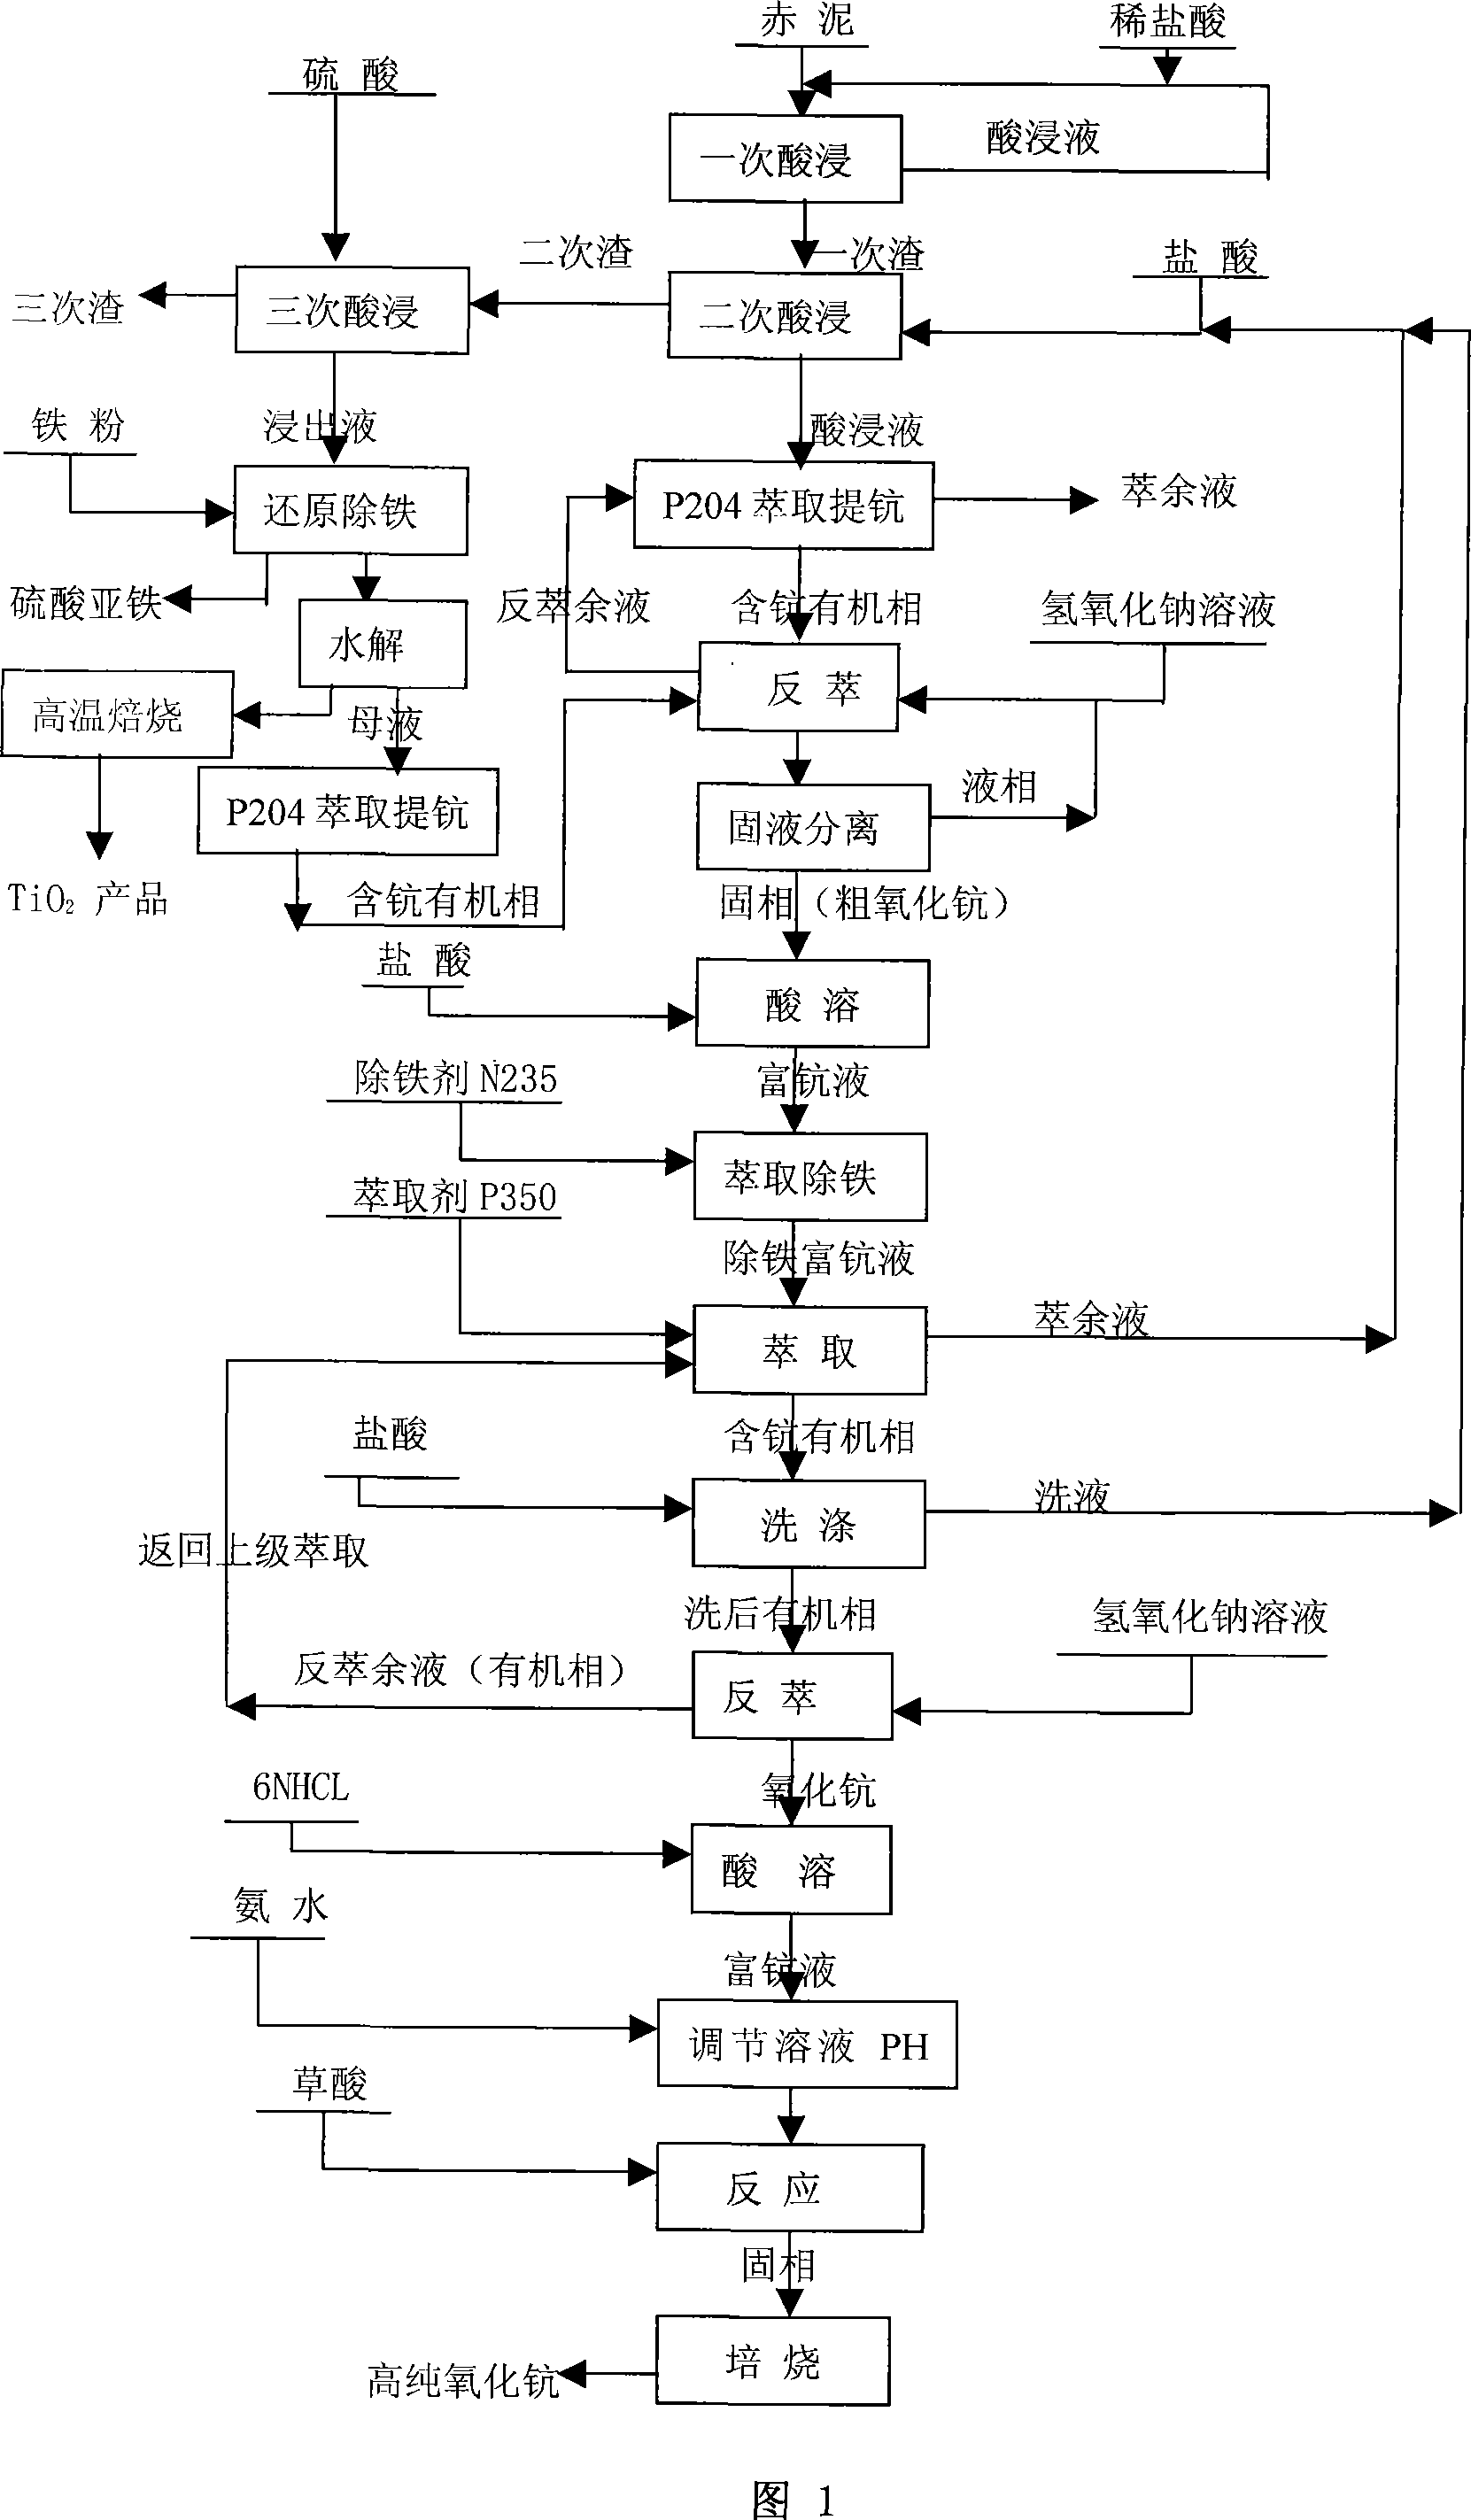 Method for extracting metal scandium and titanium from red mud